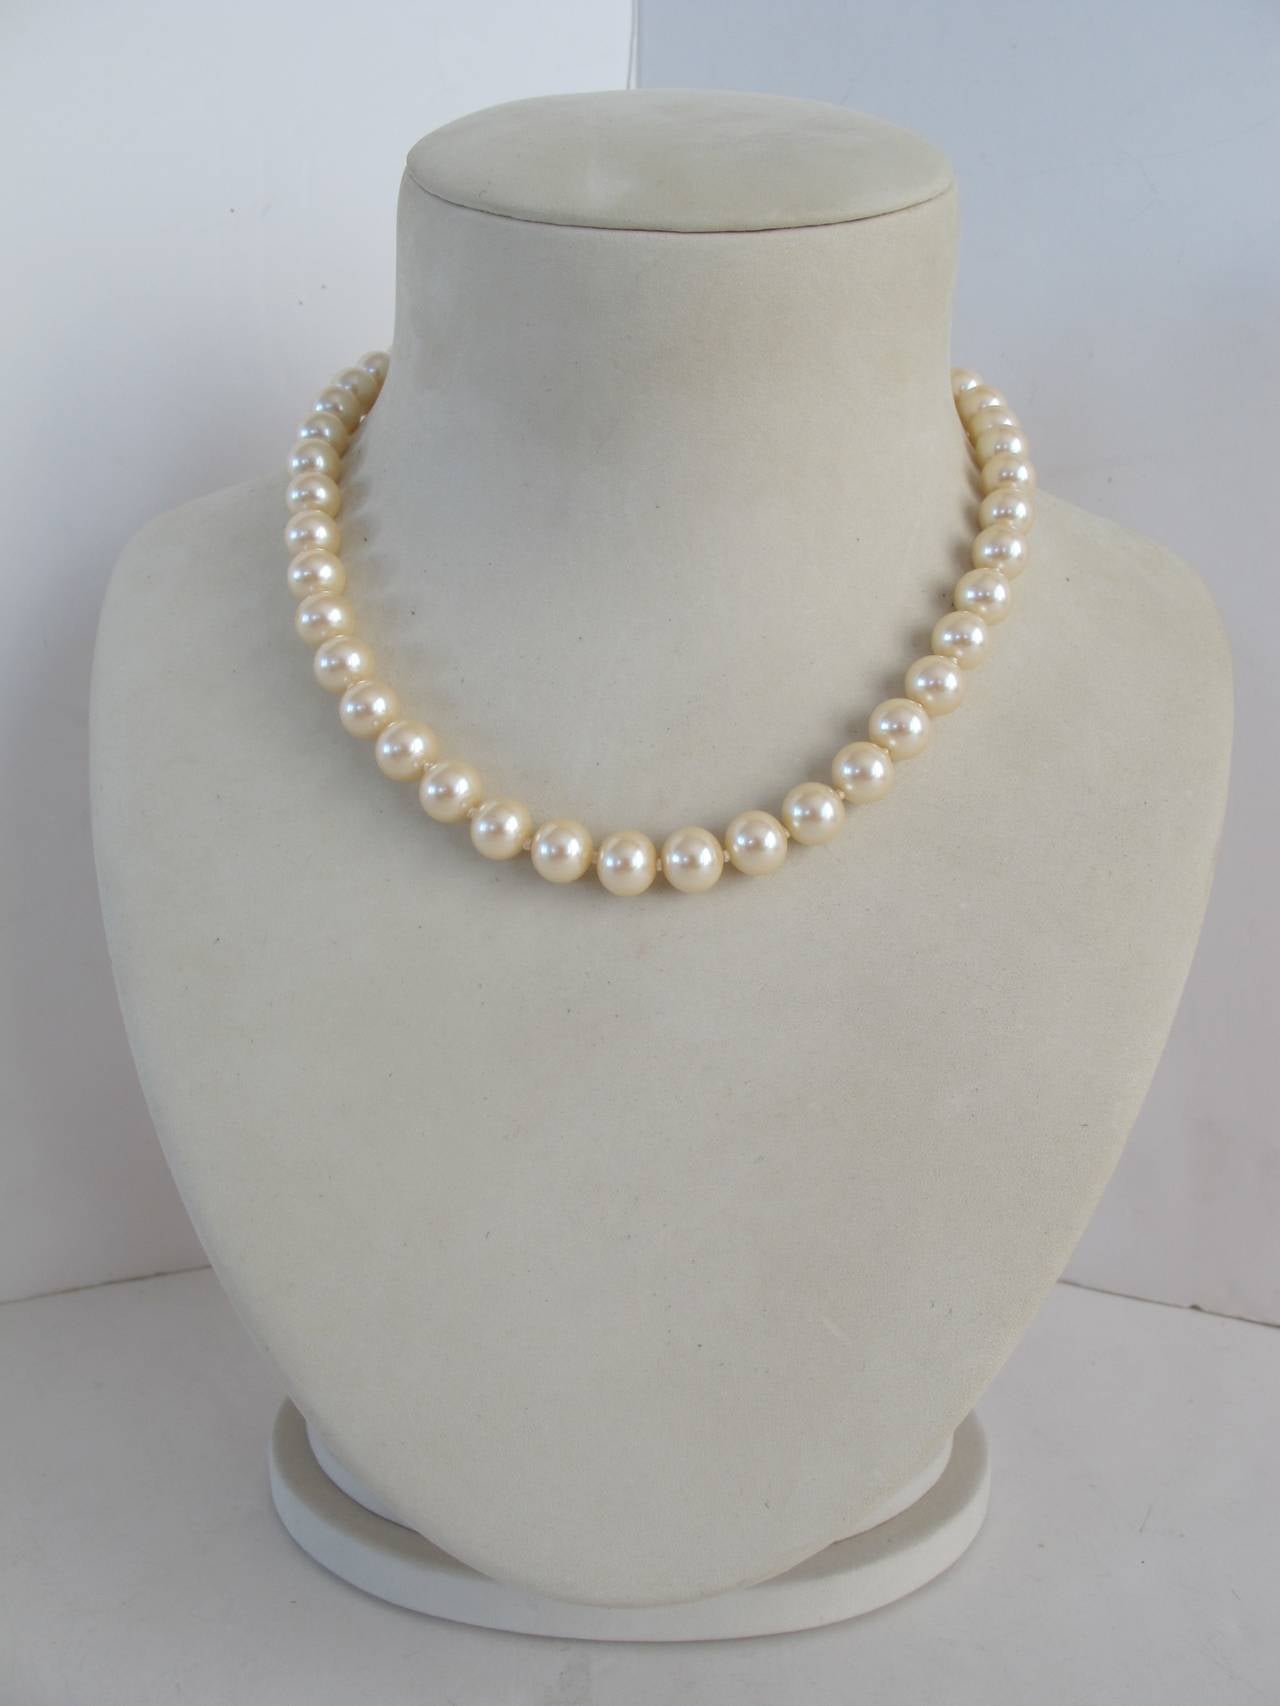 This 1.5 cm pearl necklace pearl necklace is hand - knotted. Because of its simplicity and rhinestone disco ball closure, it will adorn the neck with elegance.